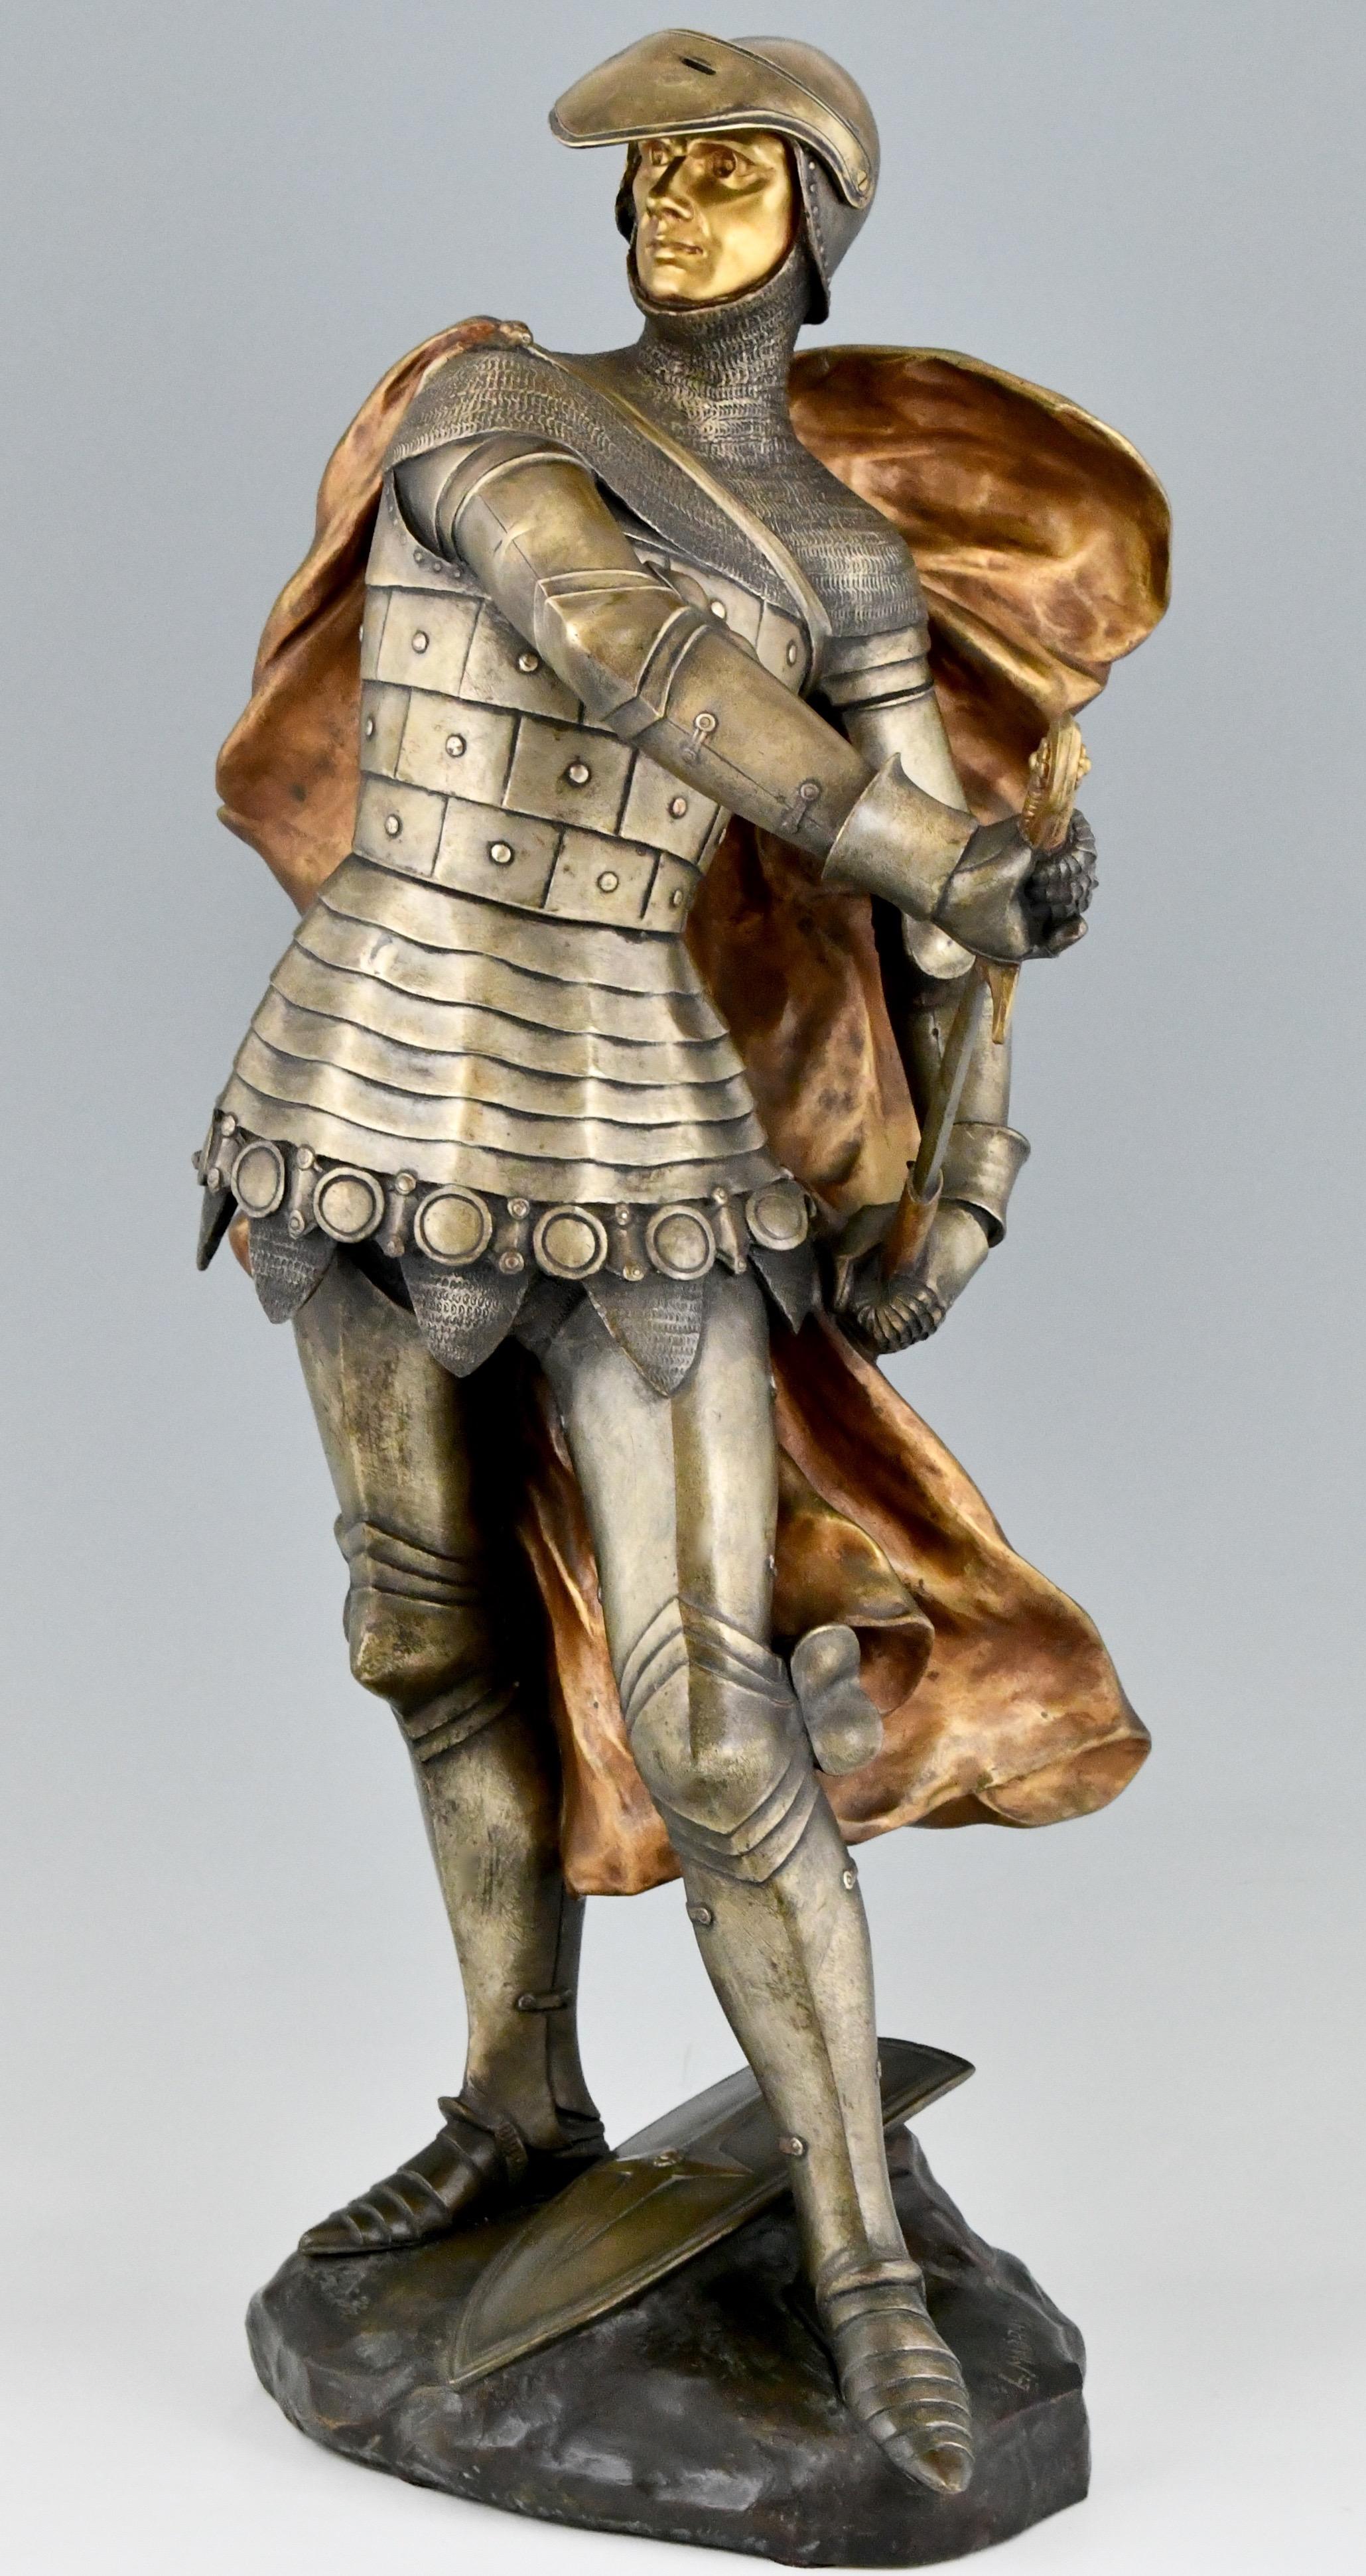 Impressive bronze Art Nouveau sculpture of a knight in armor with cloak by Lucas Madrassi, France, ca. 1900.
The sculpture has a beautiful patina in silver and gold. 

Literature:
“Etains 1900” Philippe Dahan, les éditions de l'amateur. ?“The